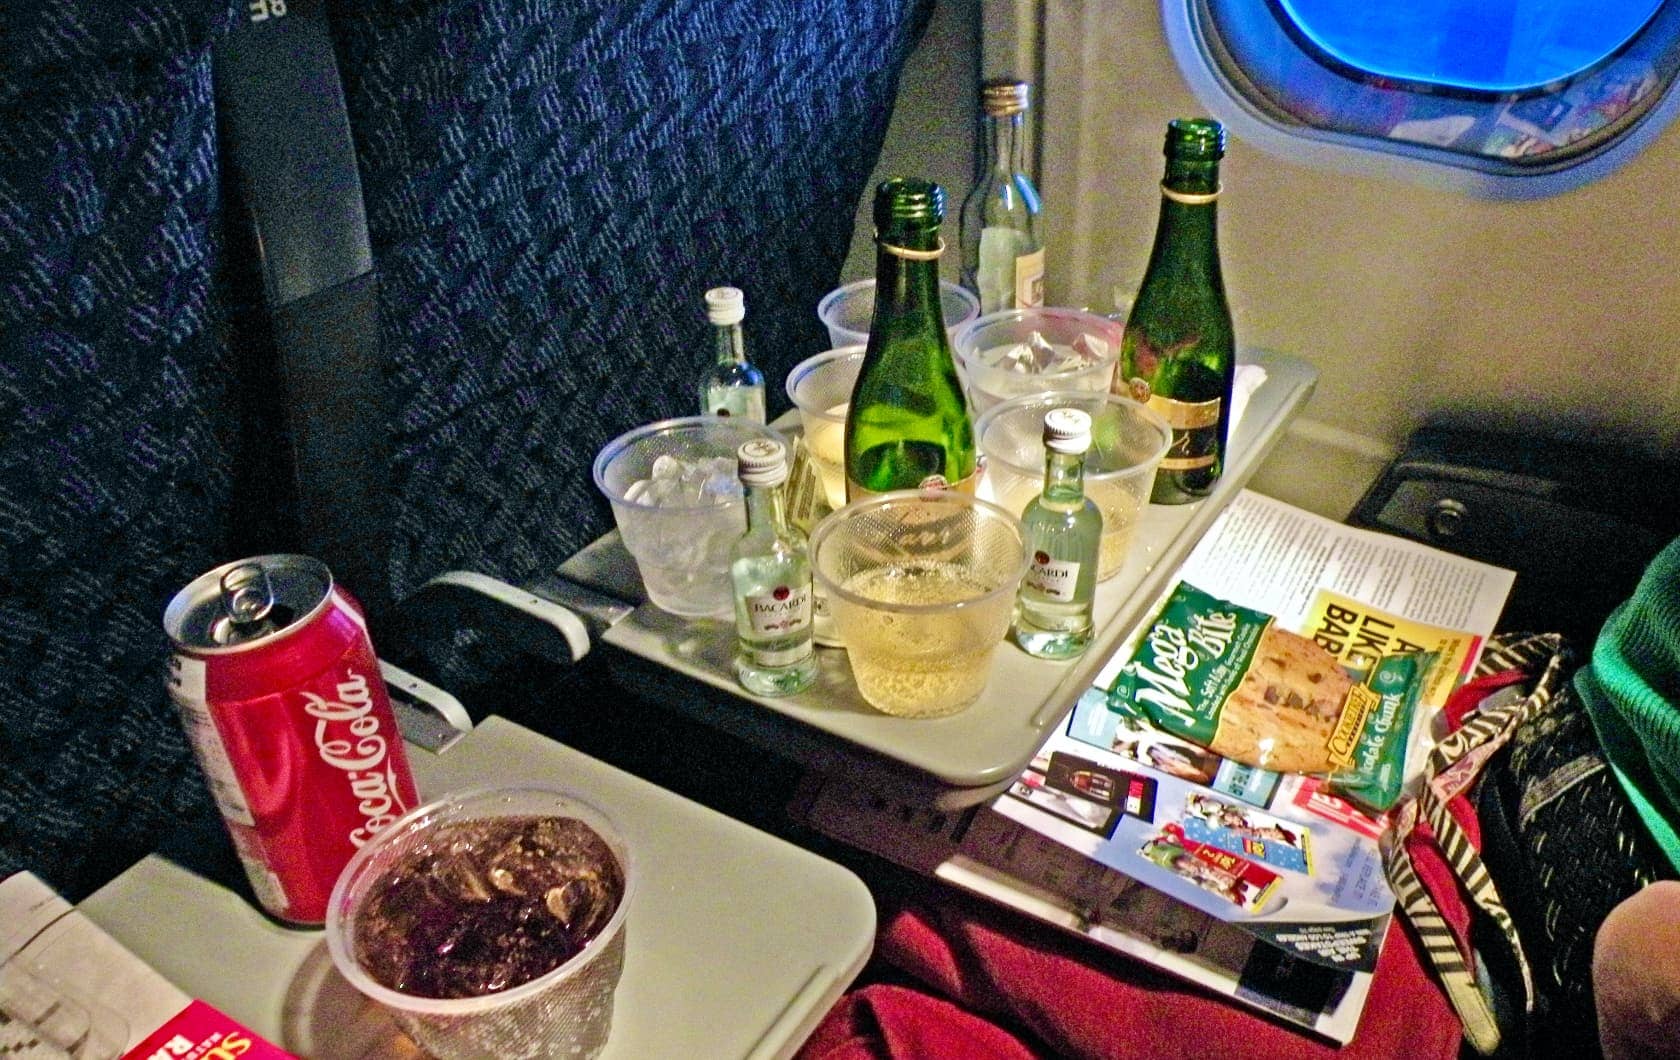 Beverages and snacks on airplane